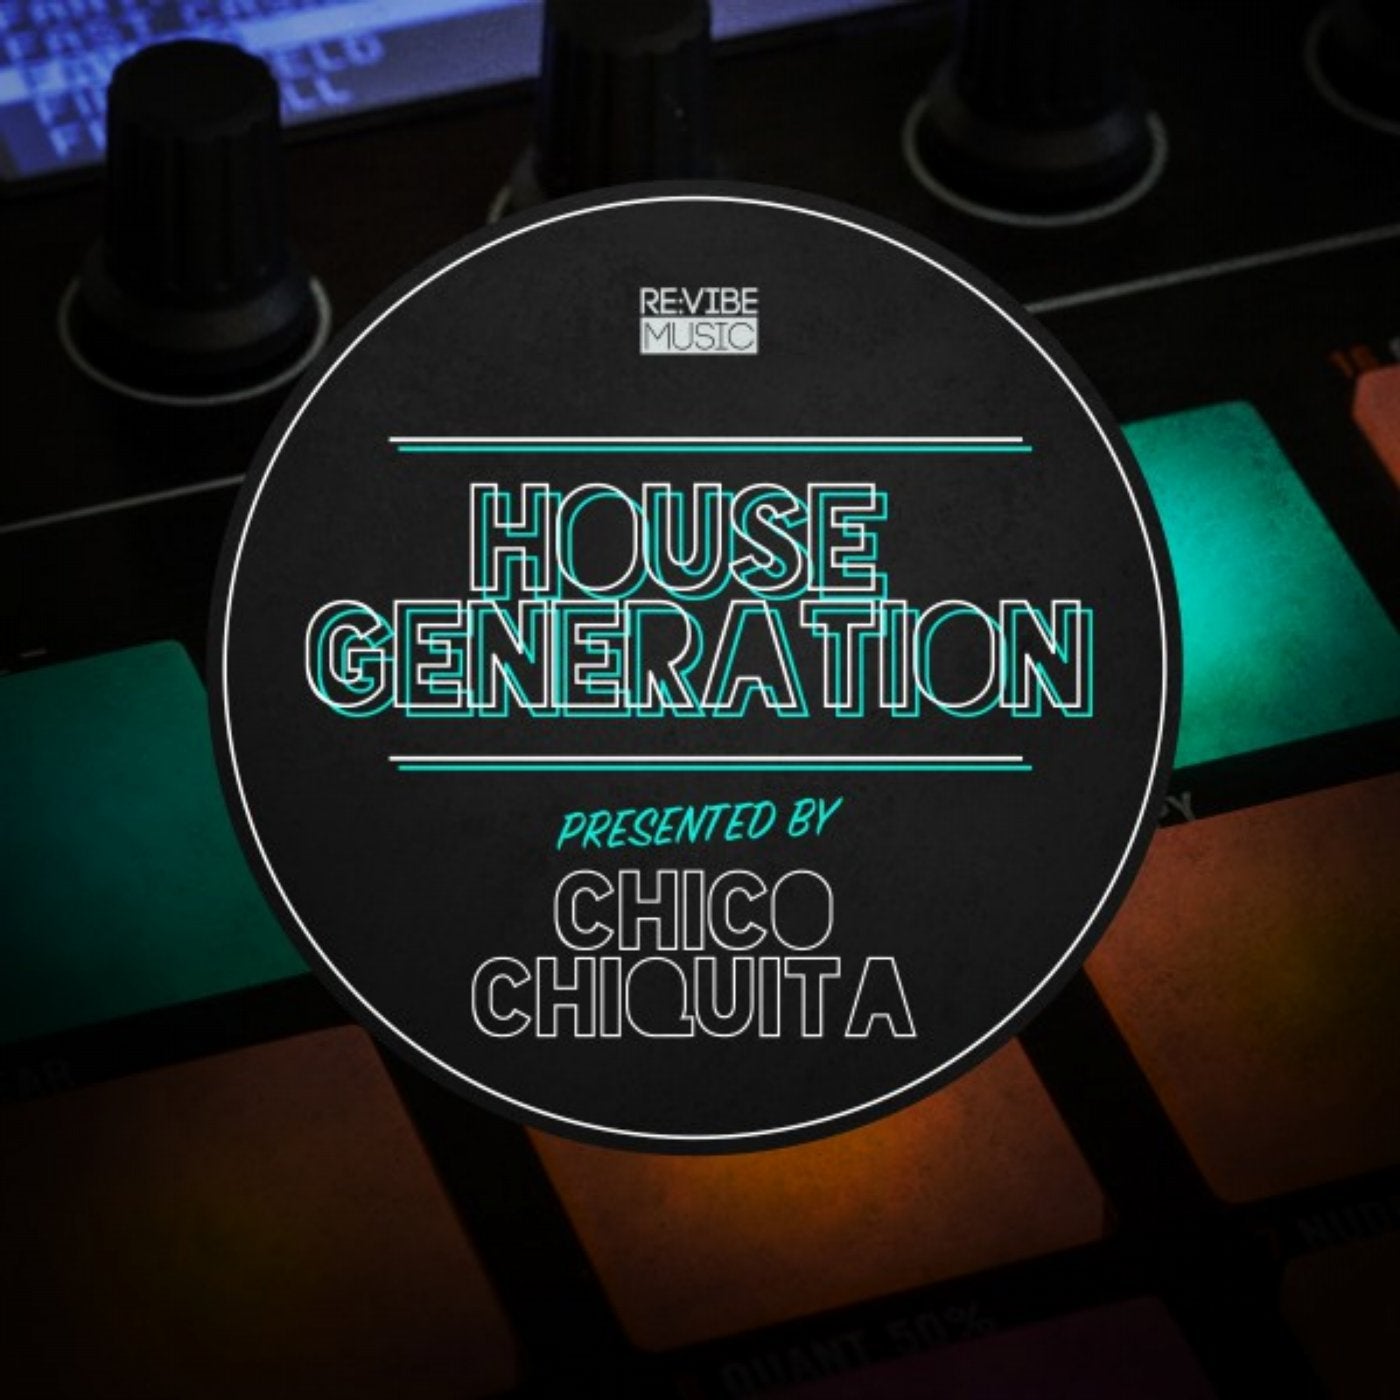 House Generation Presented by Chico Chiquita